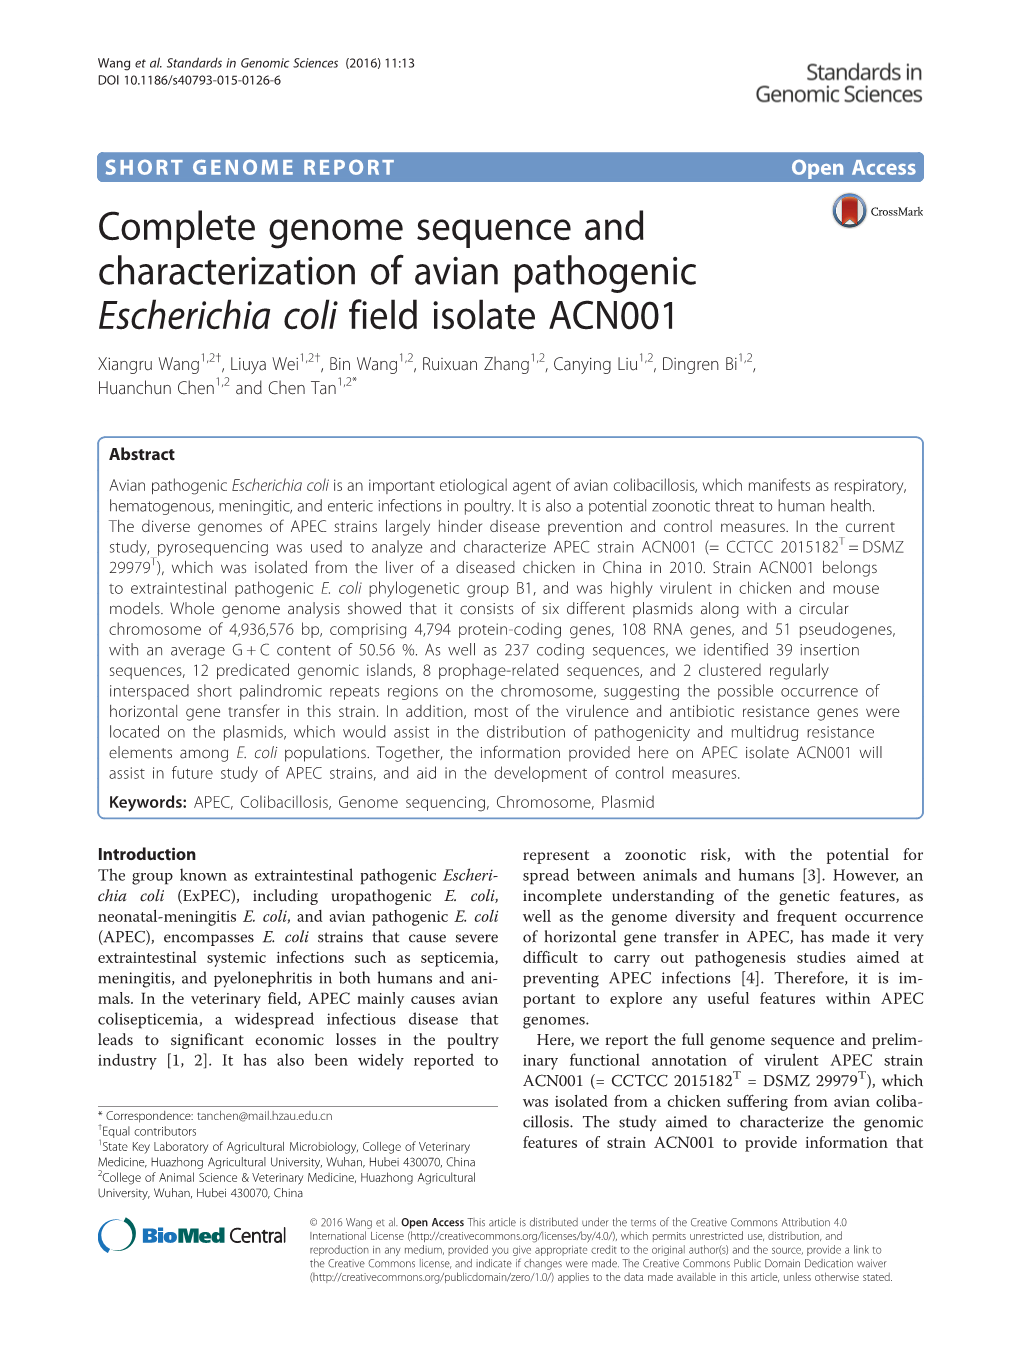 Complete Genome Sequence and Characterization of Avian